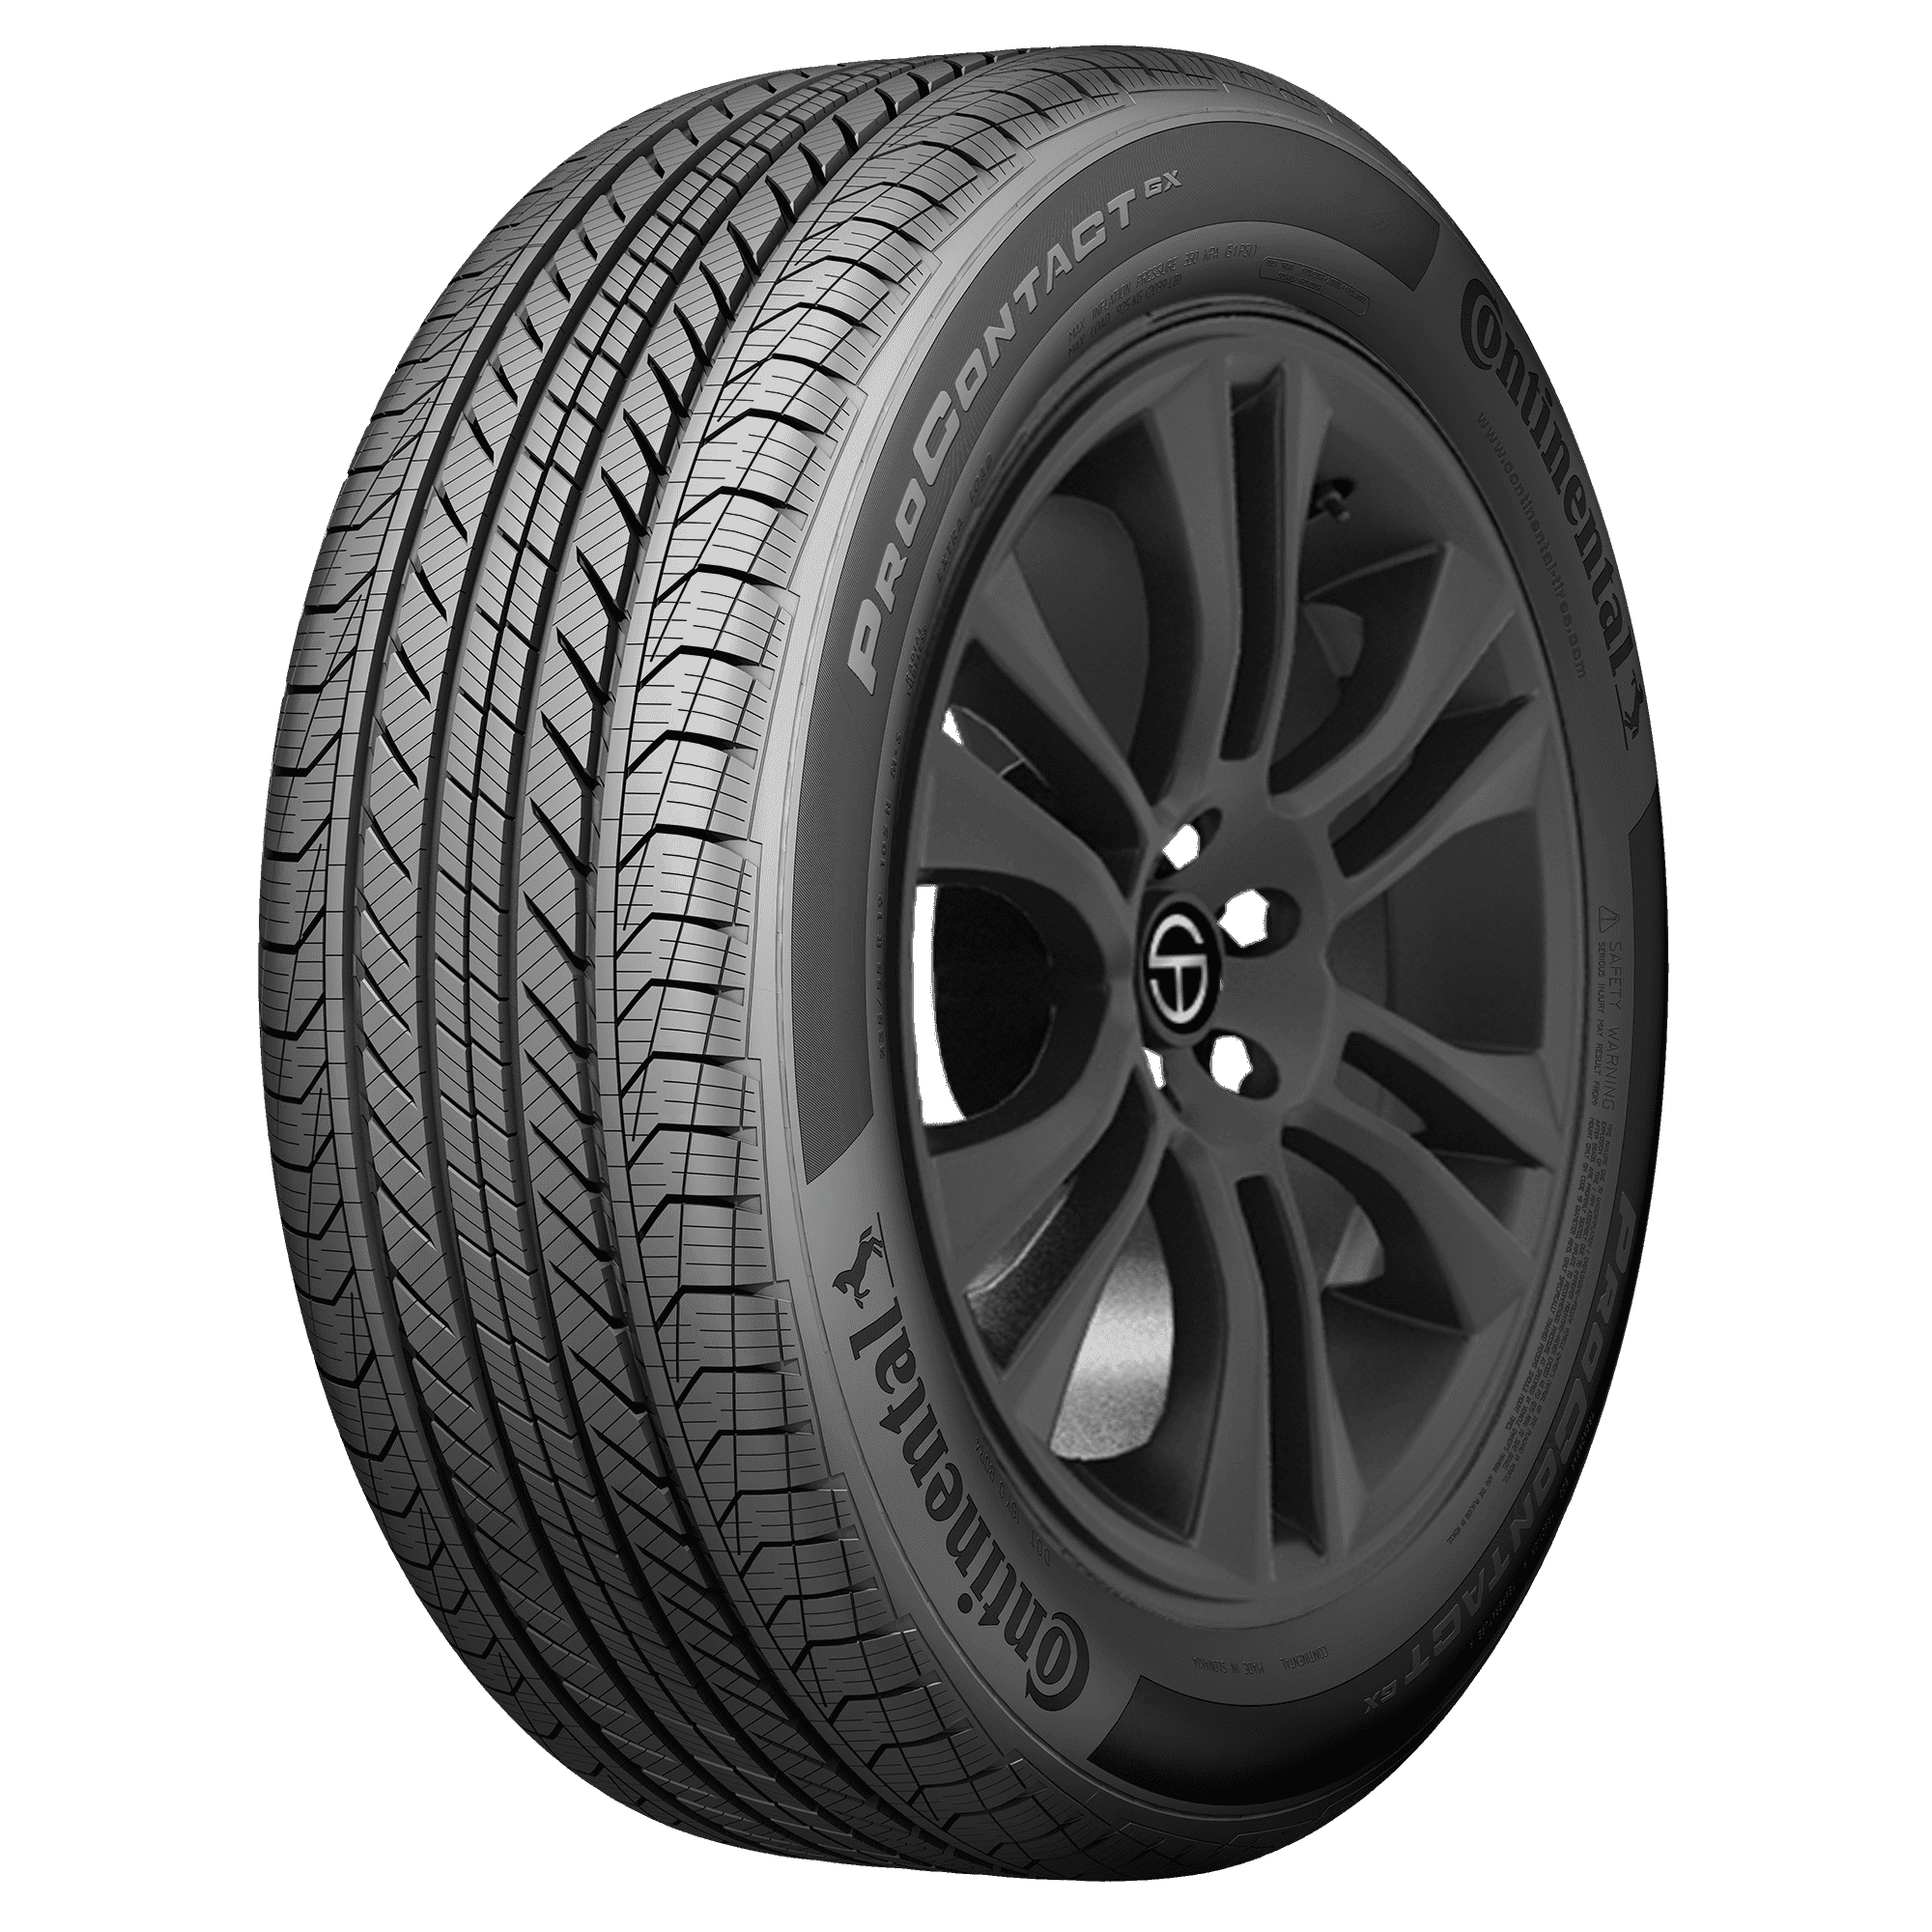 Buy Continental ProContact GX Tires Online | SimpleTire